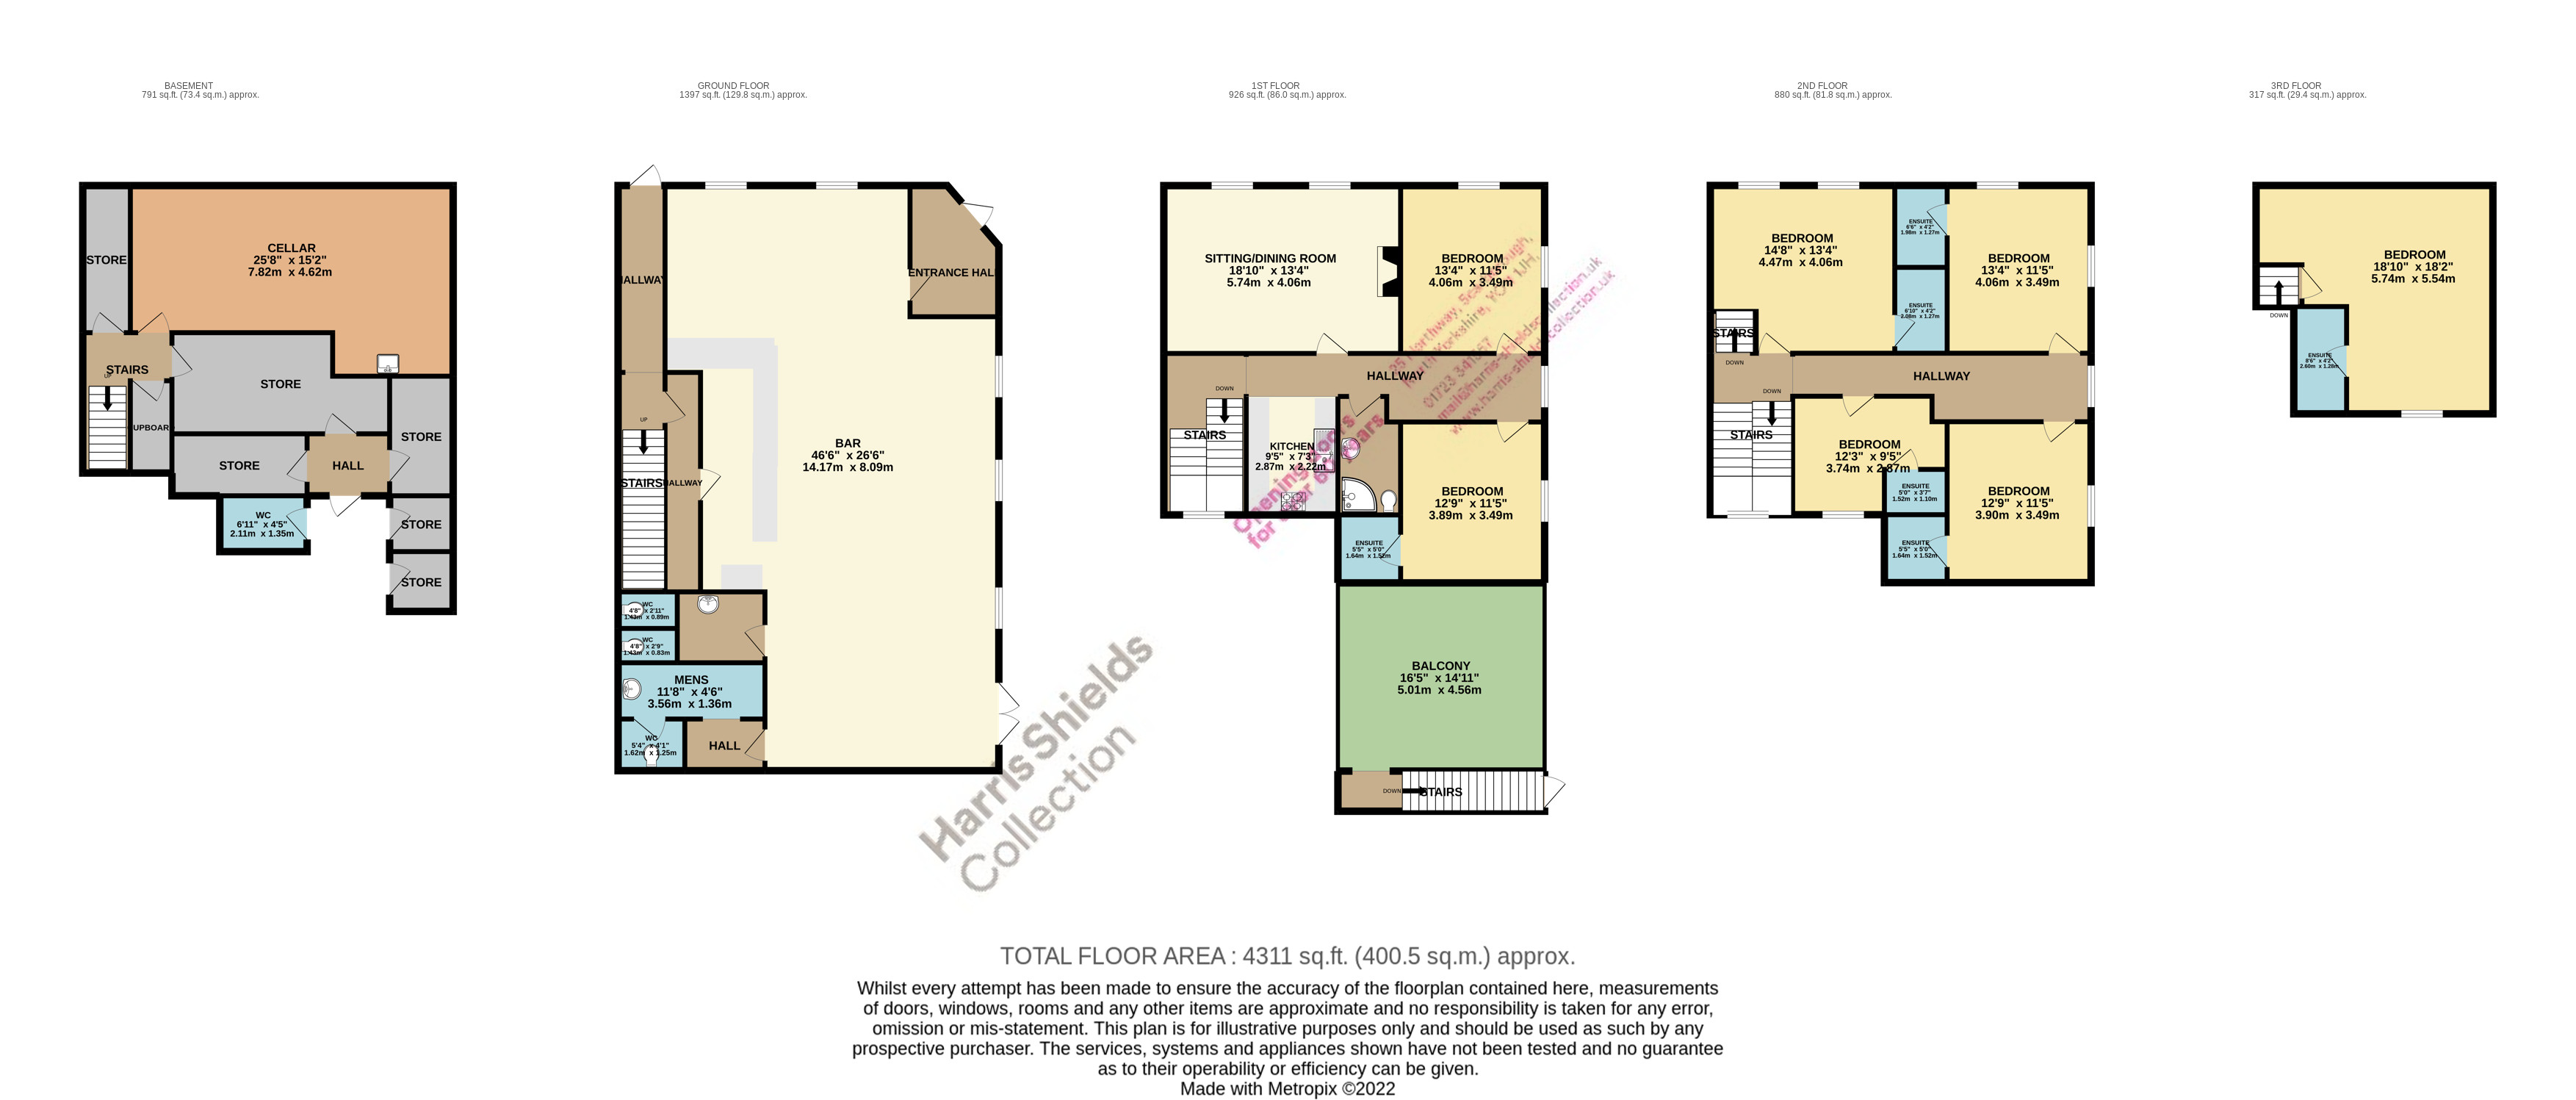 For sale in Victoria Road, Scarborough - Property floorplan